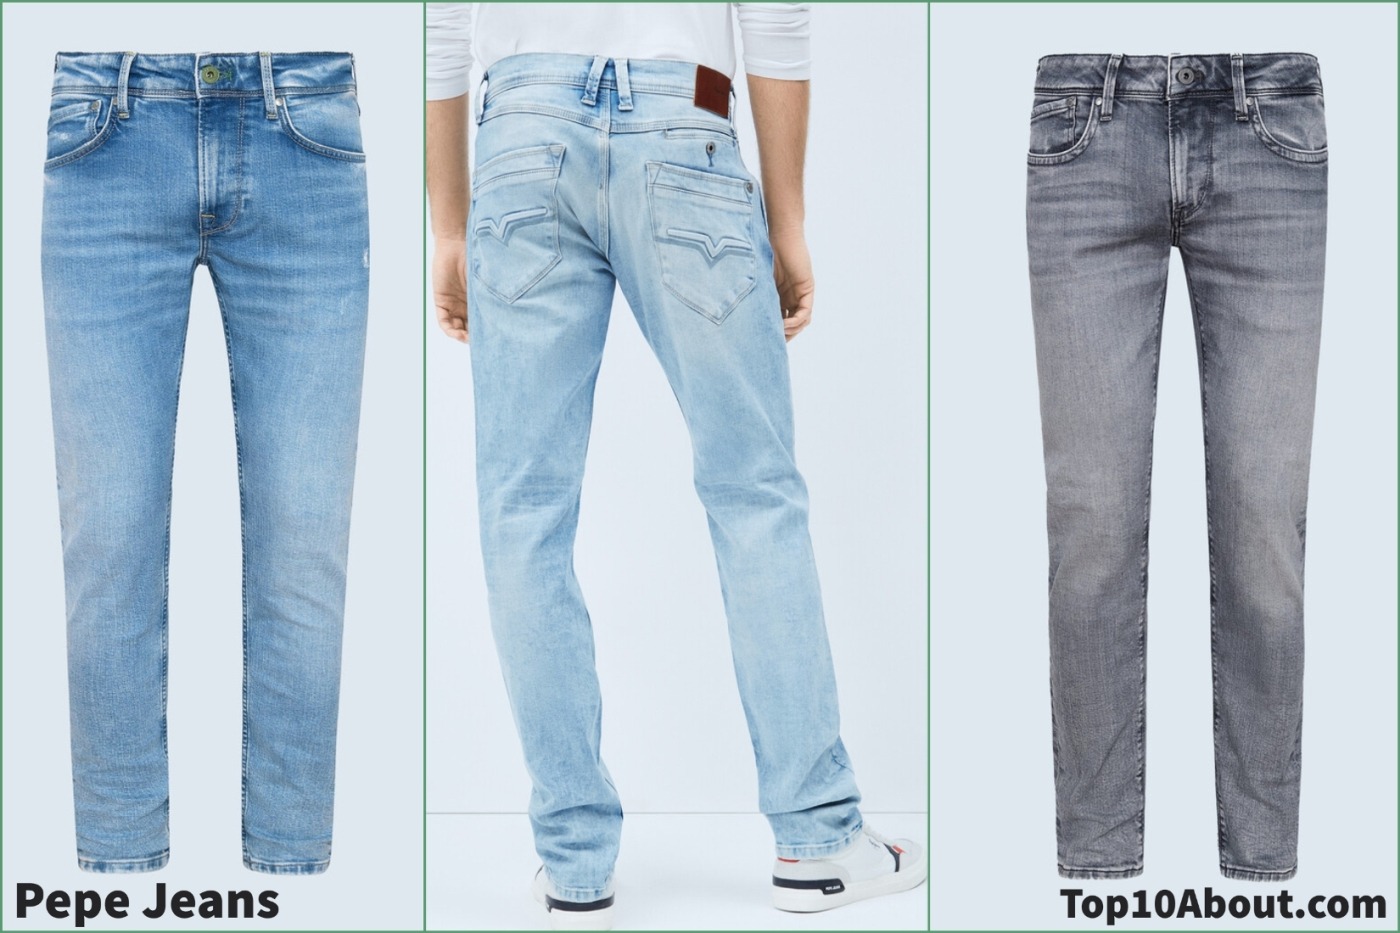 Top 10 Best and Popular Jeans Brands in the World - Top 10 About